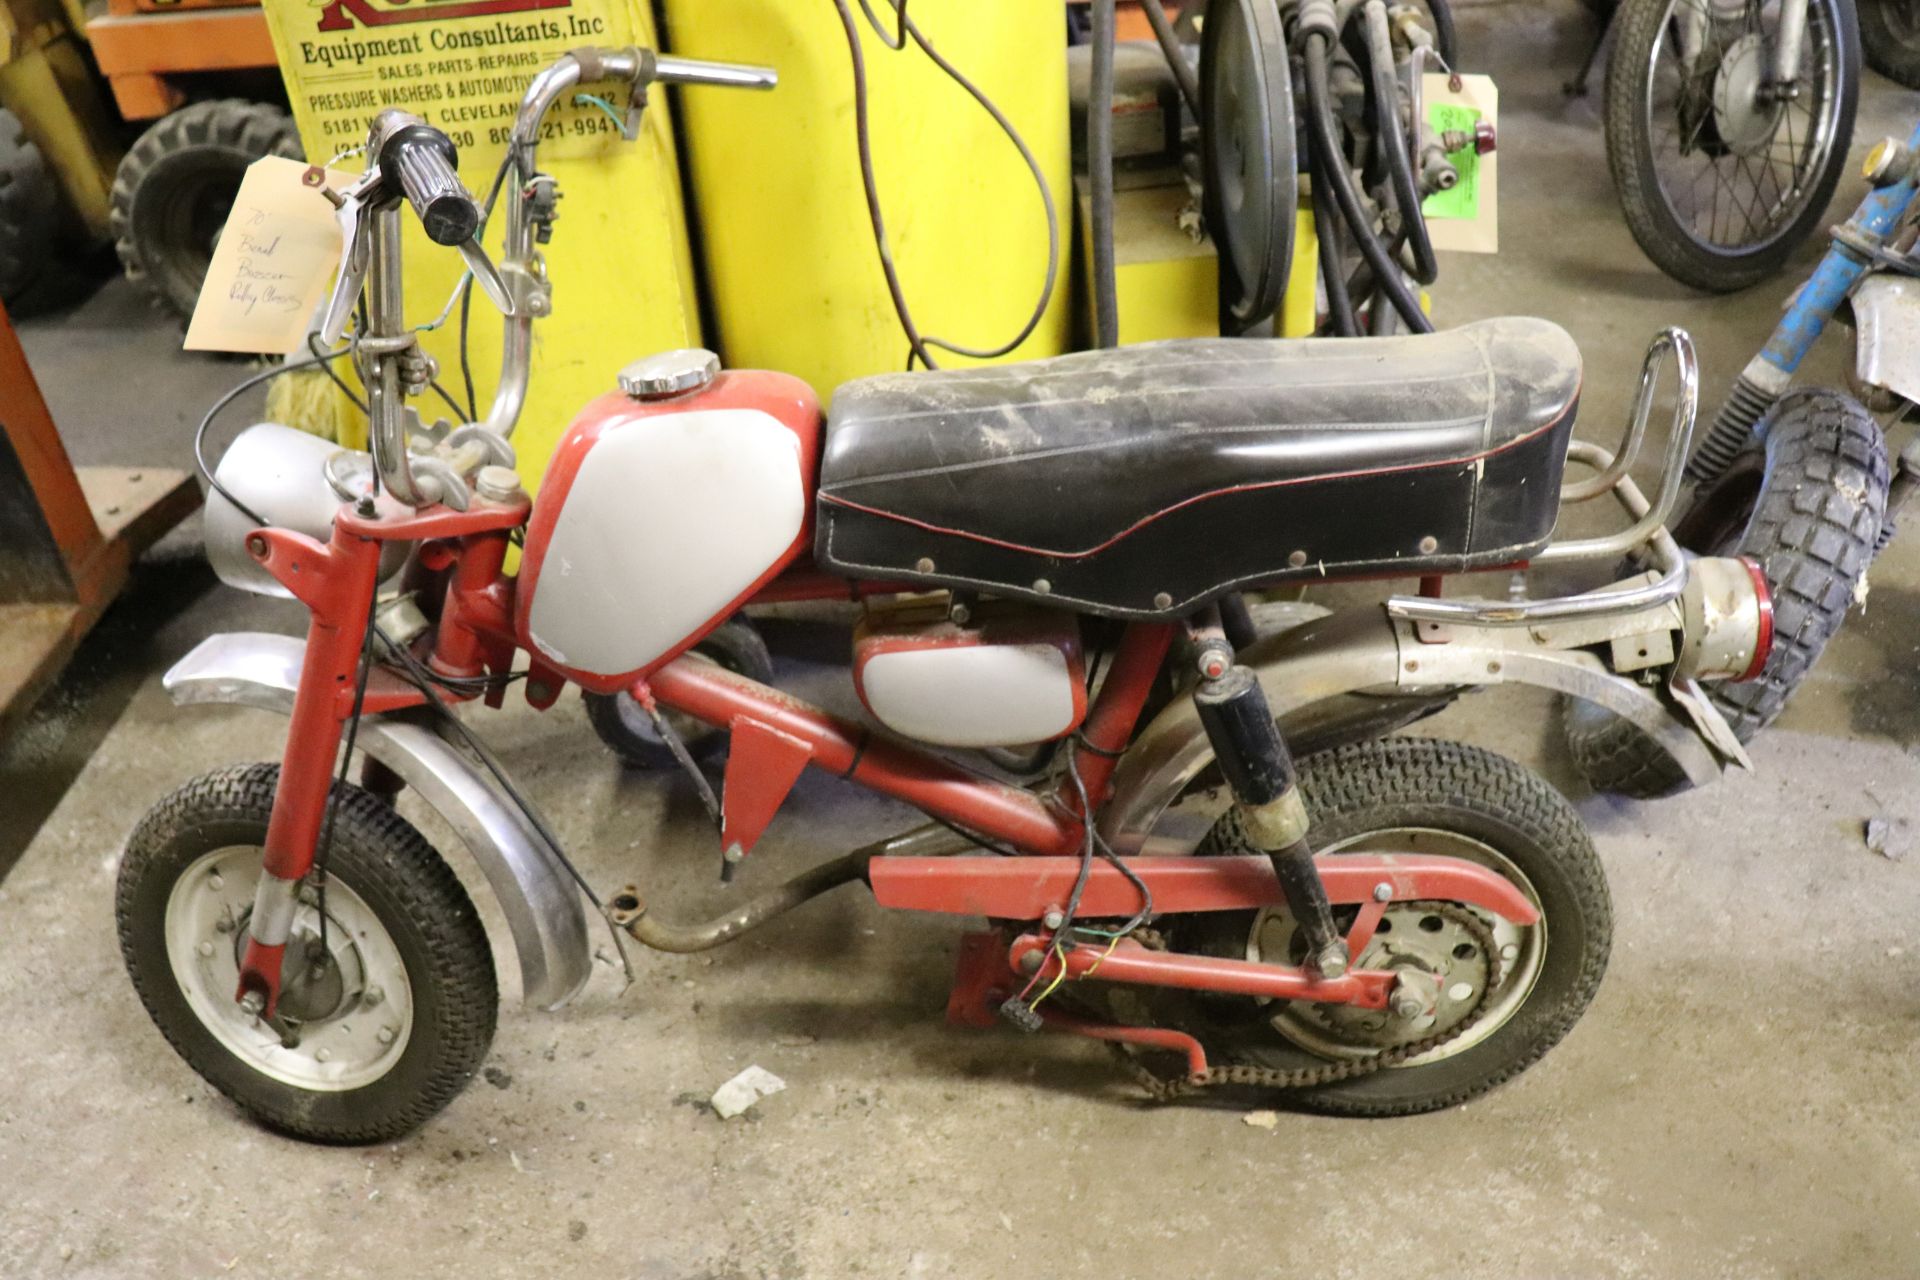 1970 Benelli Buzzer, rolling chassis, 1,262 miles, serial #537684 MINI BIKES MARKED AS PARTS BIKES,